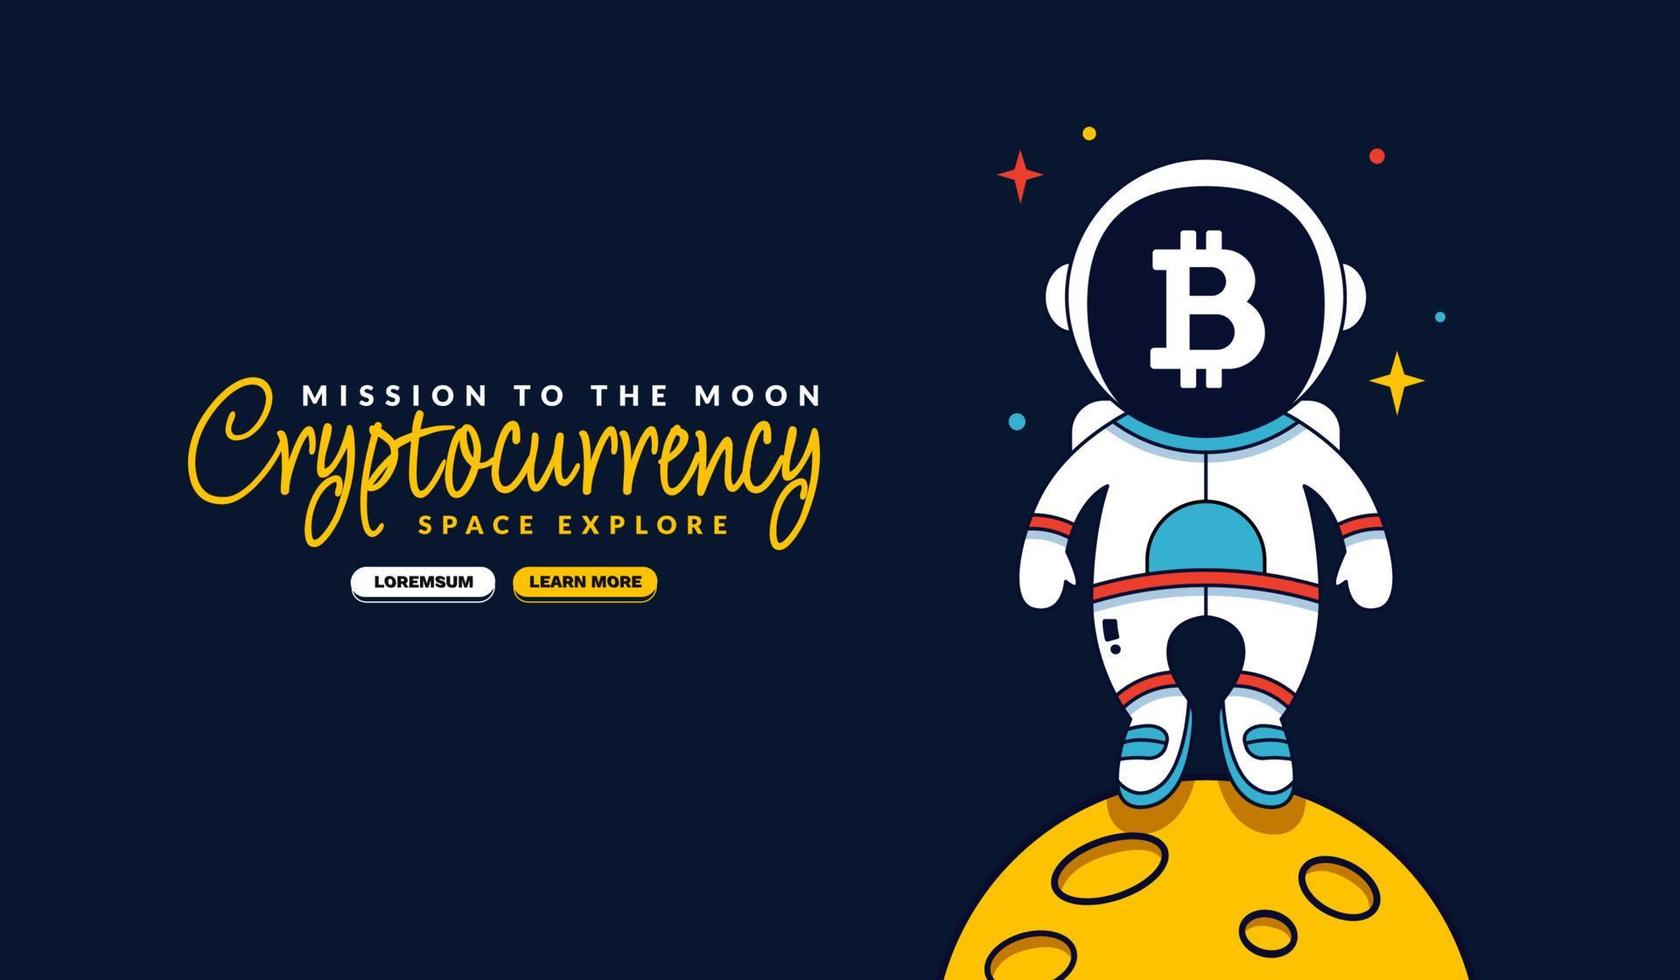 Bitcoin Astronaut standing on the Moon cartoon background, Mission to the moon background, Cryptocurrency mining and financial concept vector